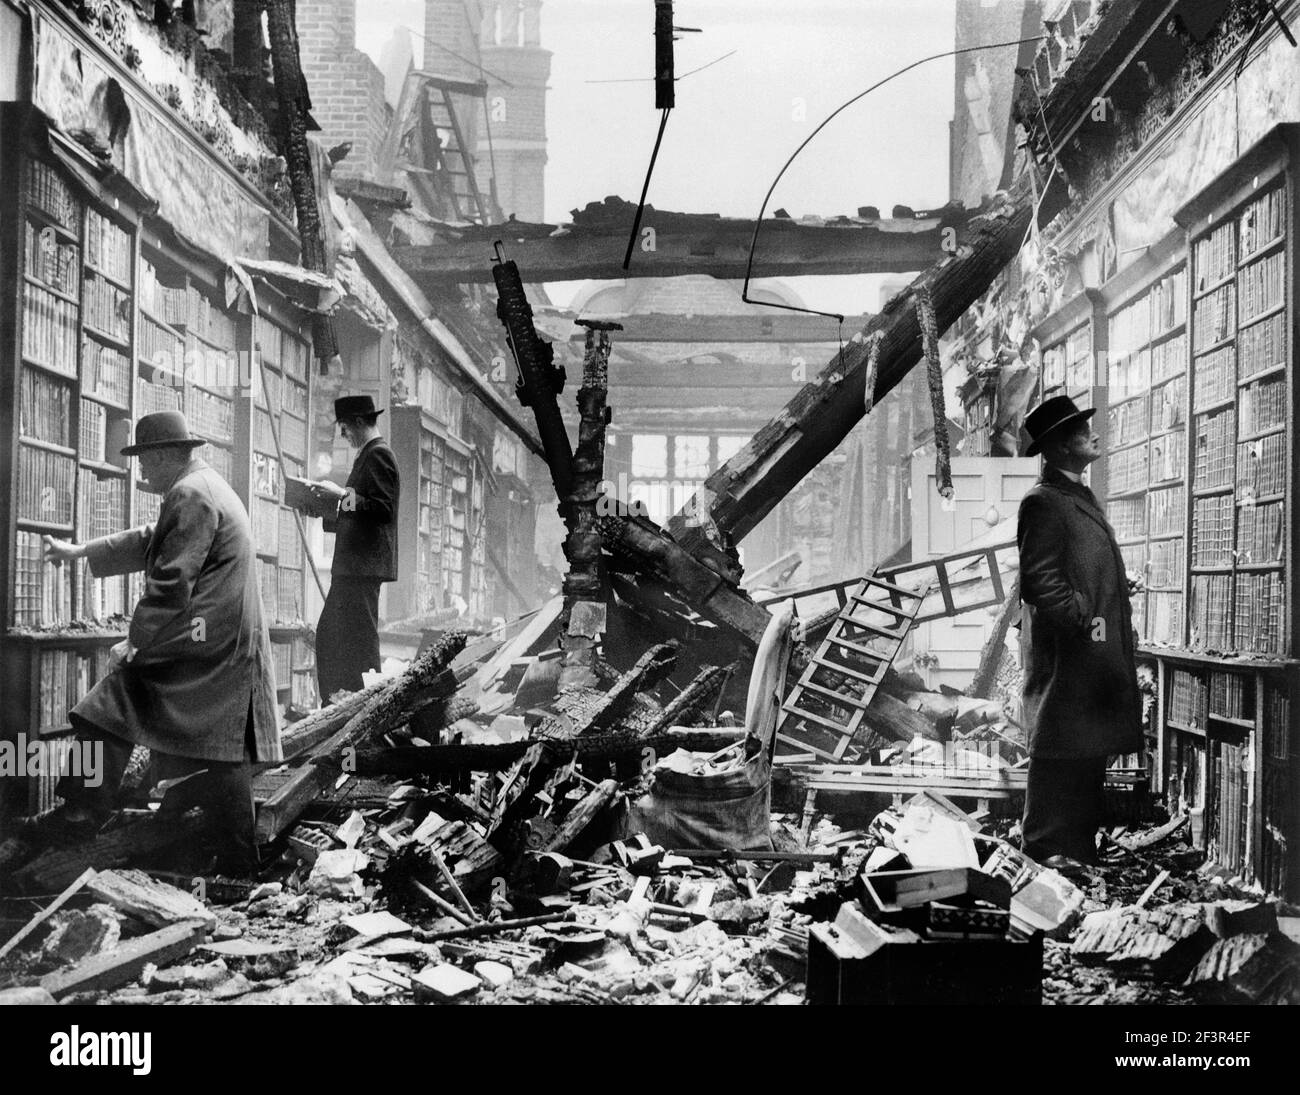 HOLLAND HOUSE, Kensington, London. An interior view of the bombed ...